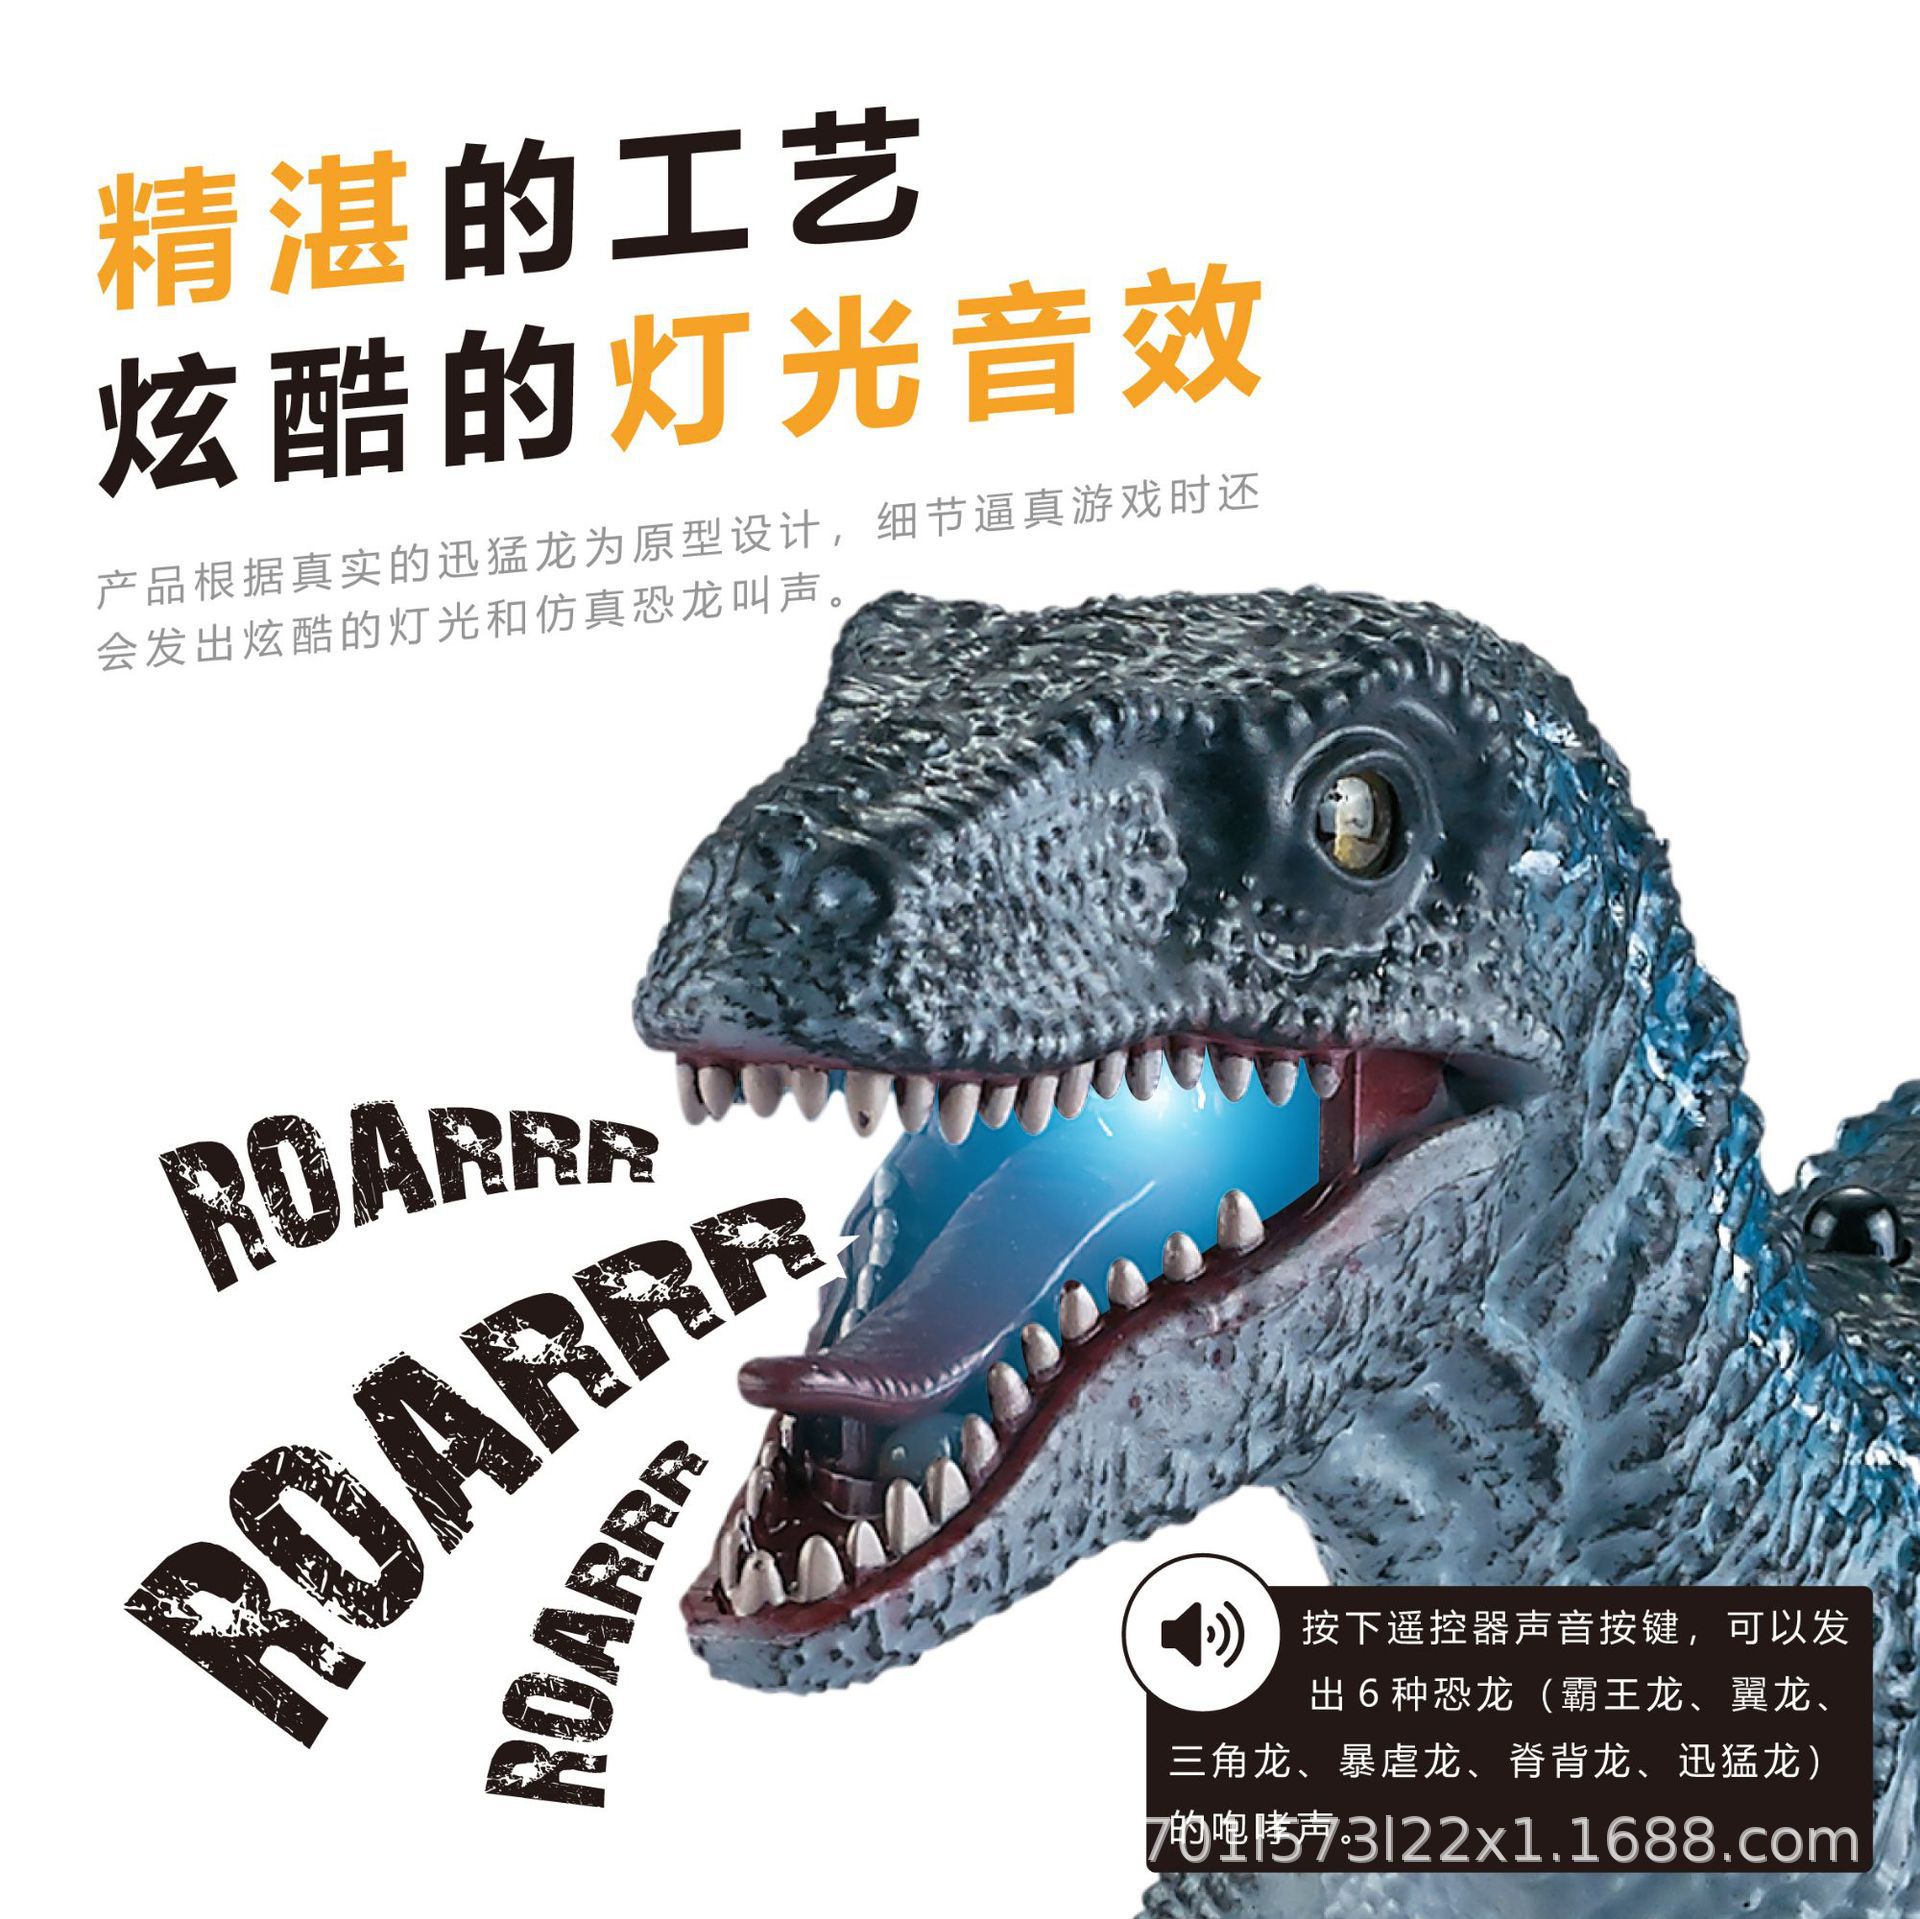 Cross-Border Hot Children's Remote Control Raptor Electric Sound and Light Artificial Mechanical Dinasour Model Boy Toy Amazon